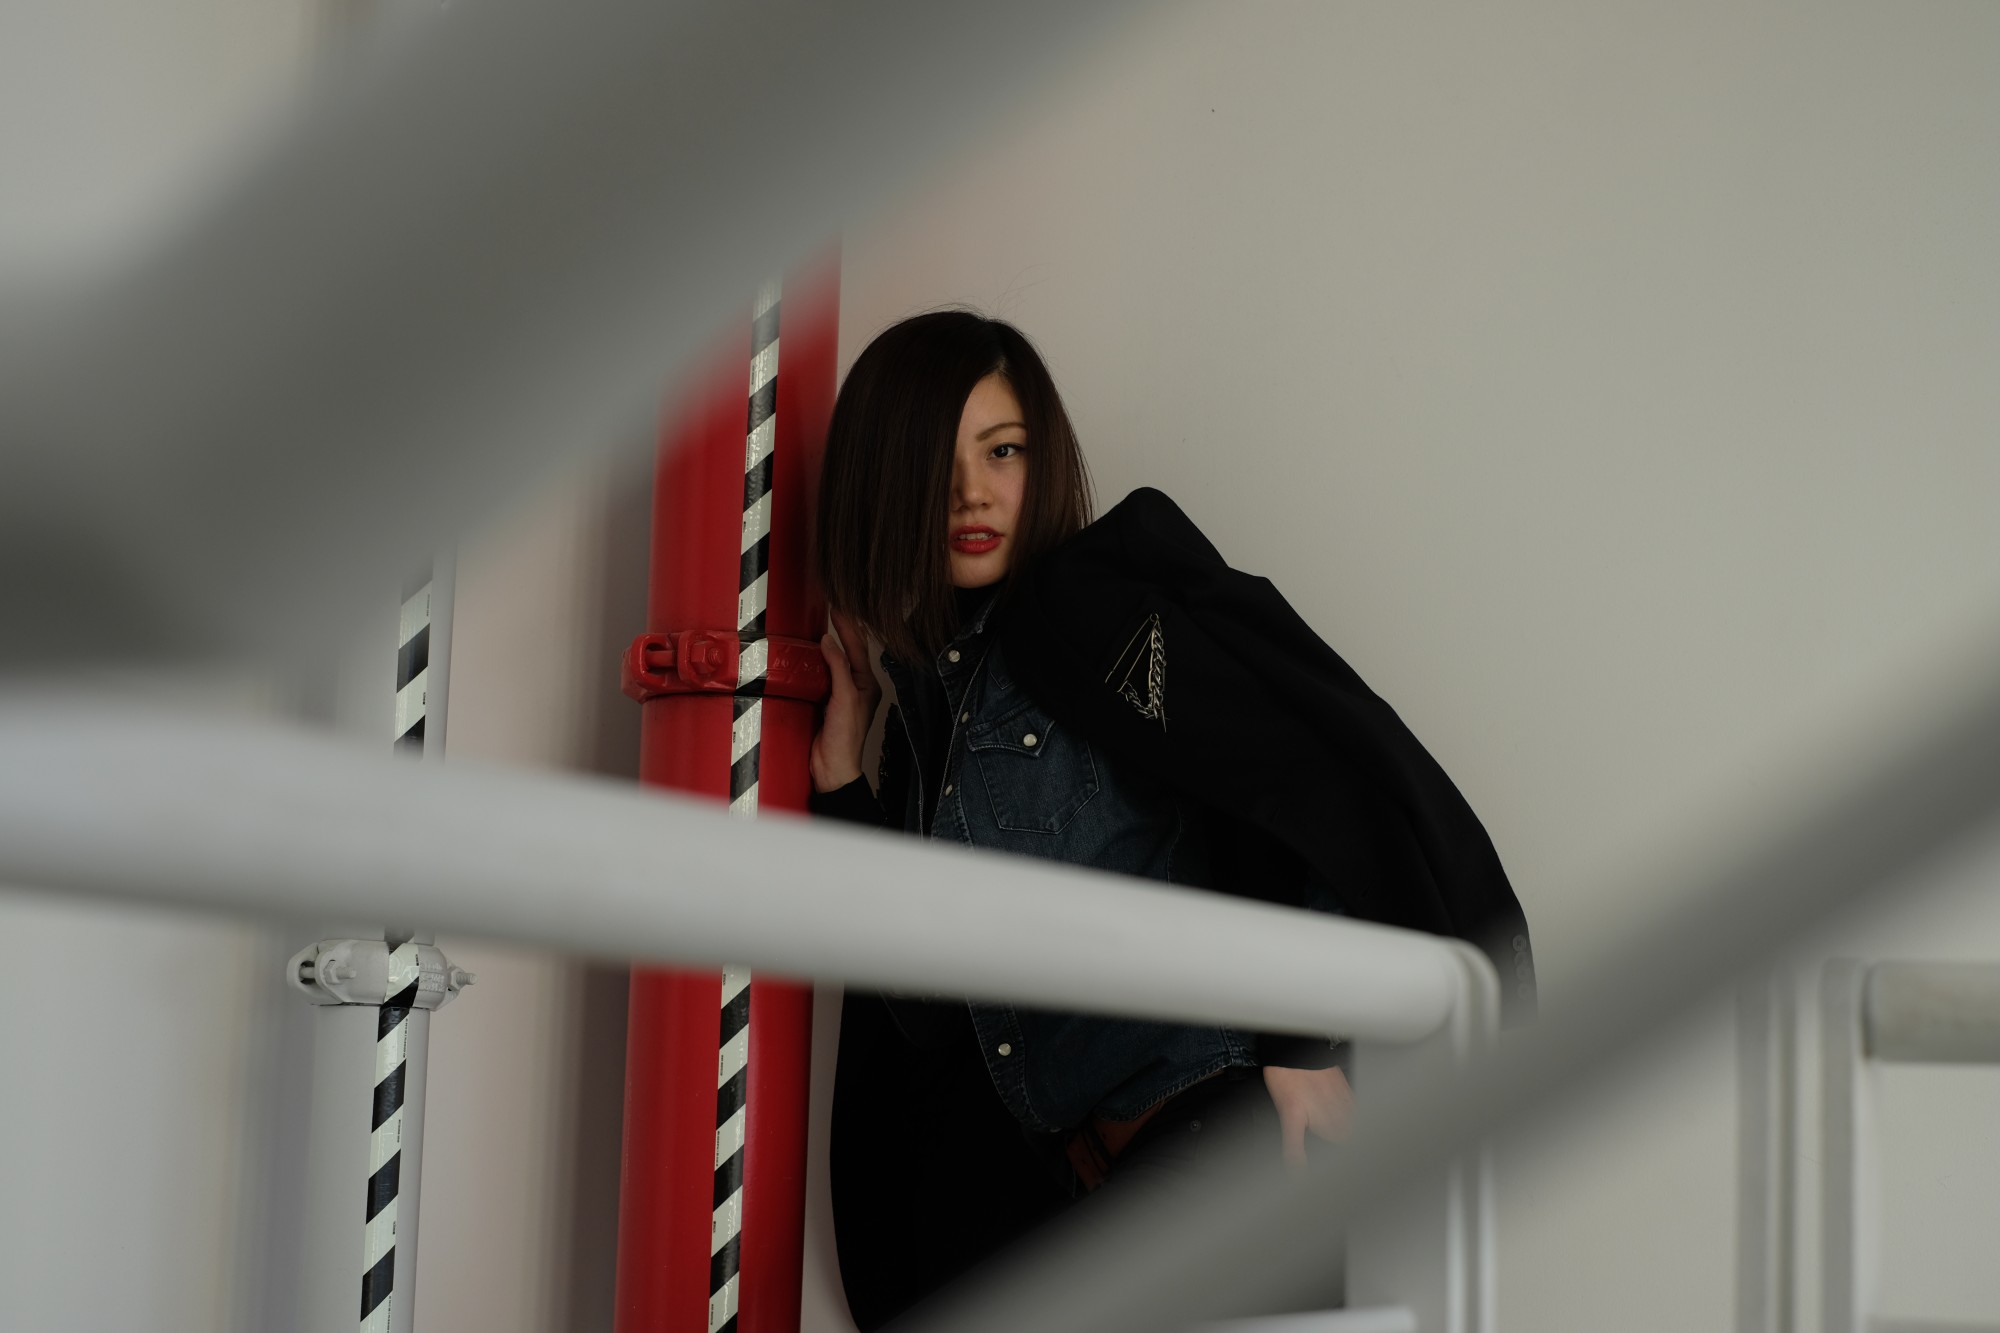 model by red pipe with blurry railings